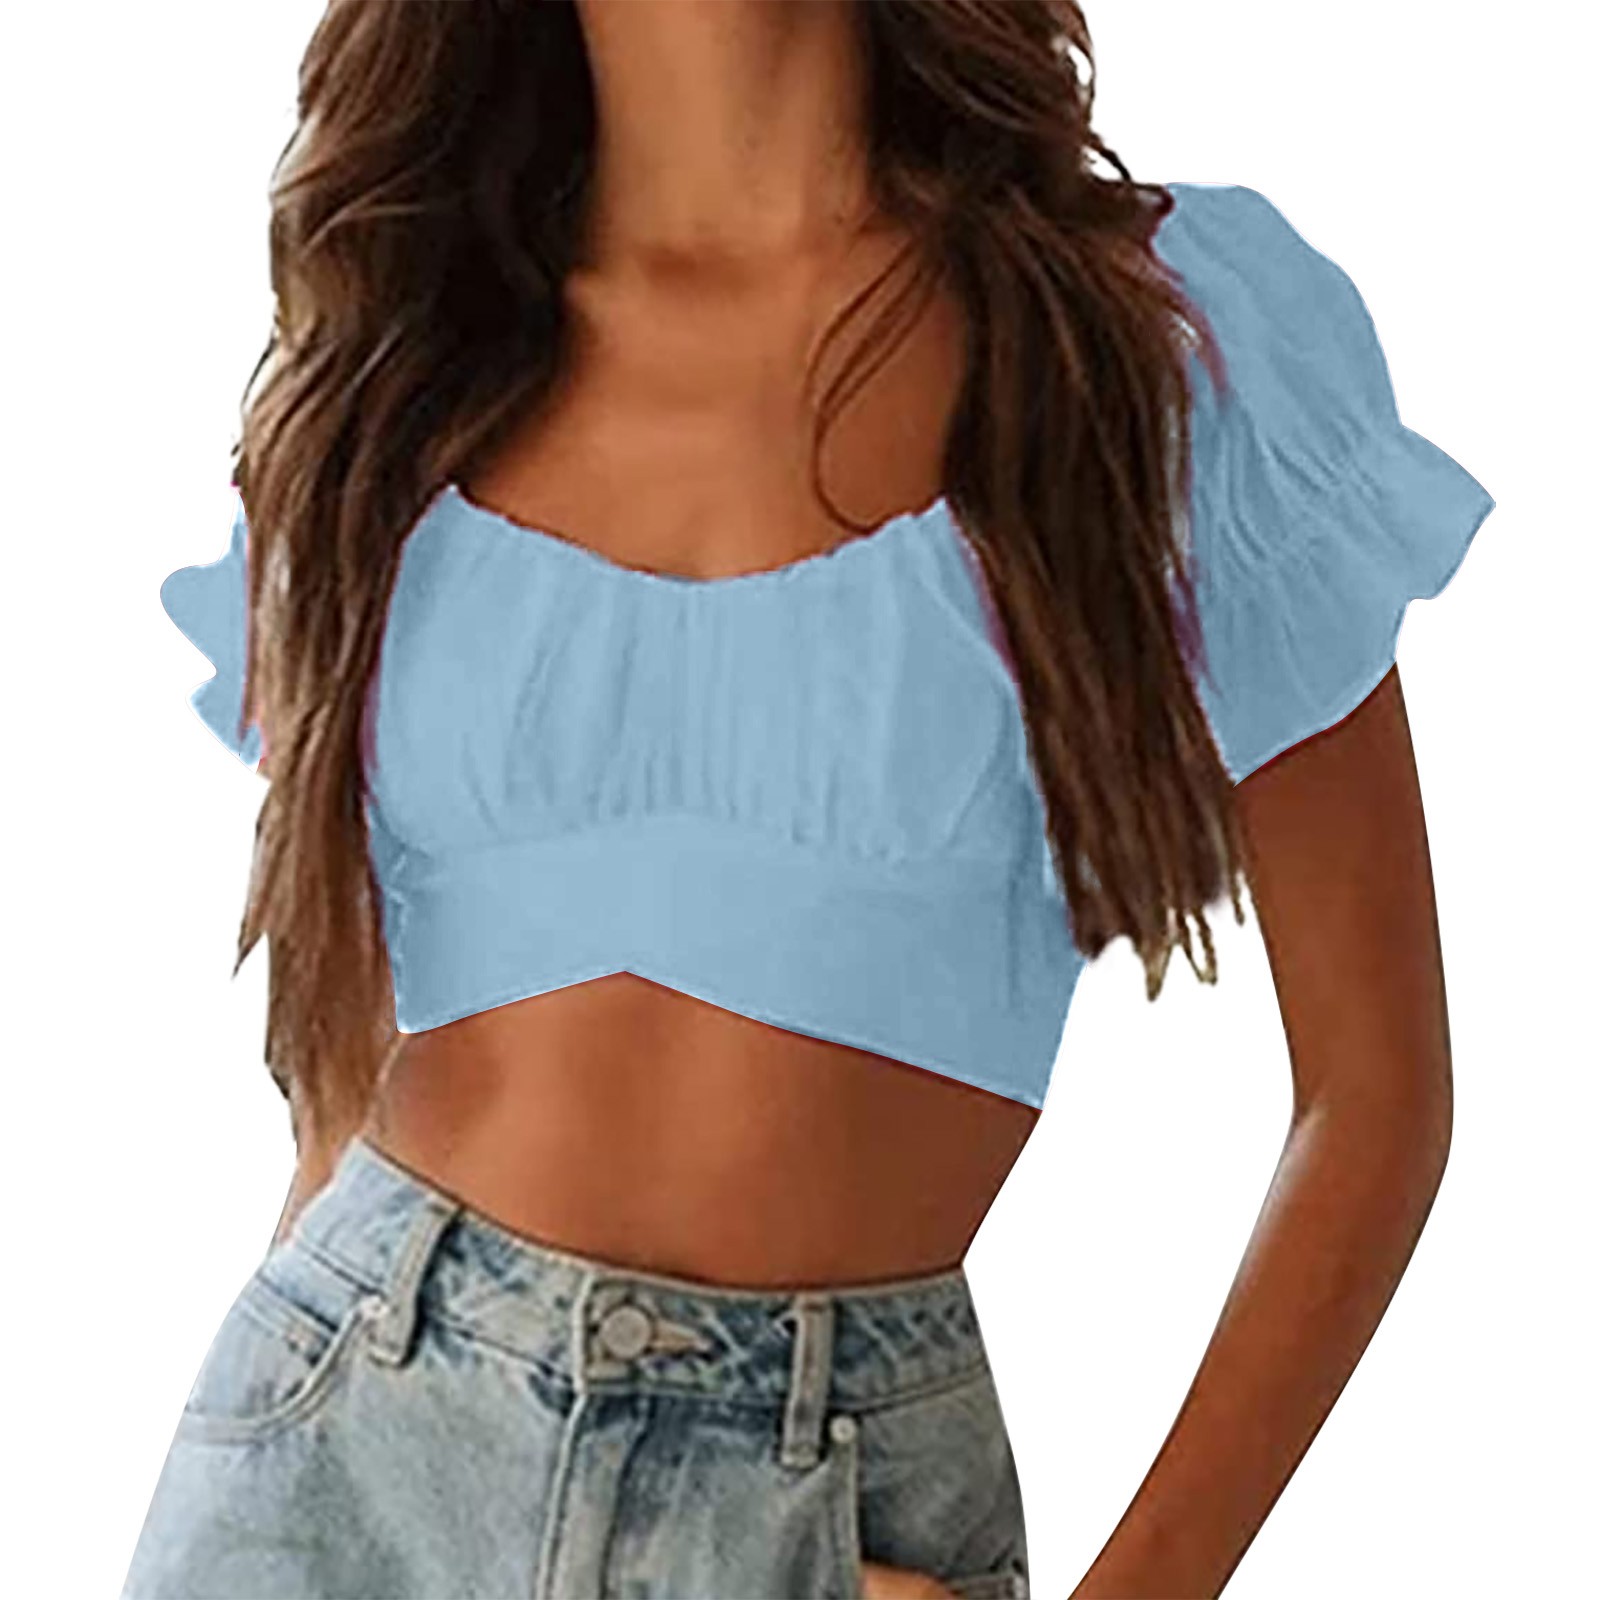 Women's Off Shoulder Crop Top Floral Print Strapless Short Sleeve V Neck Blouses Sexy Crisscross Cropped Tee Shirt - image 2 of 8